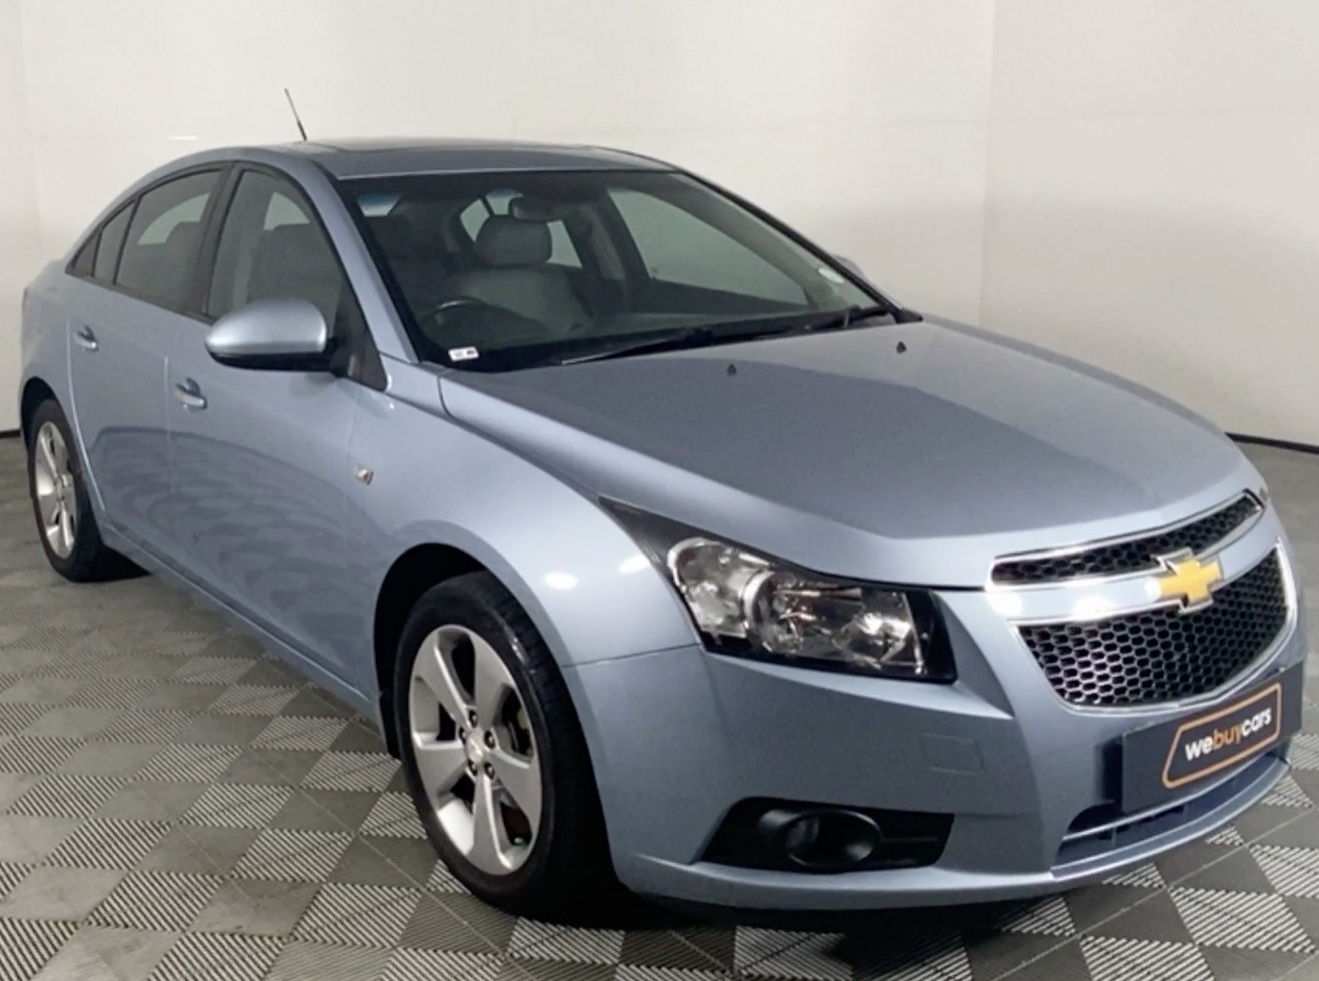 Used 2010 Chevrolet Cruze 1.8 LT Auto for sale WeBuyCars